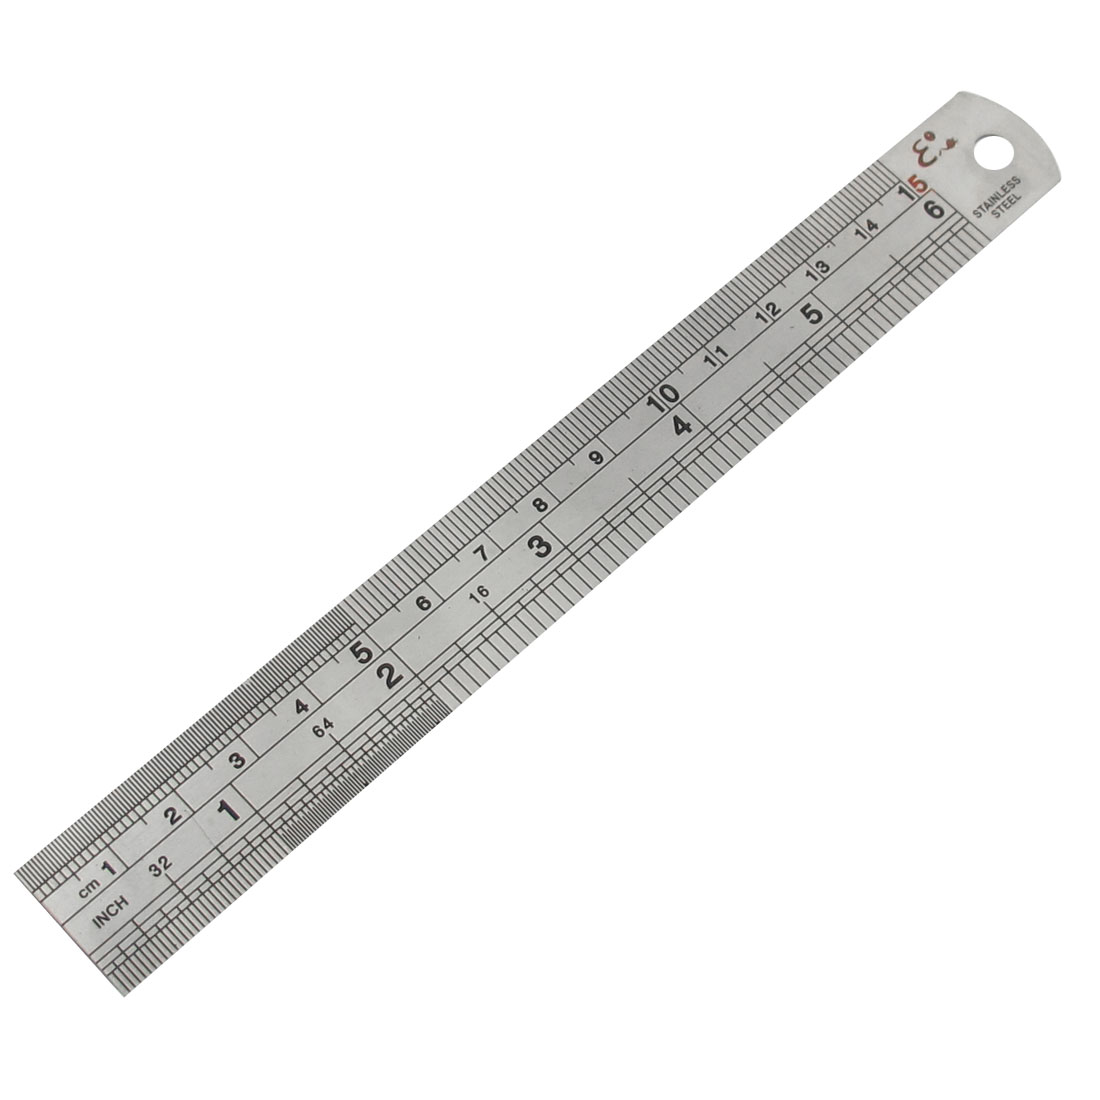 1 Inch Ruler Clipart